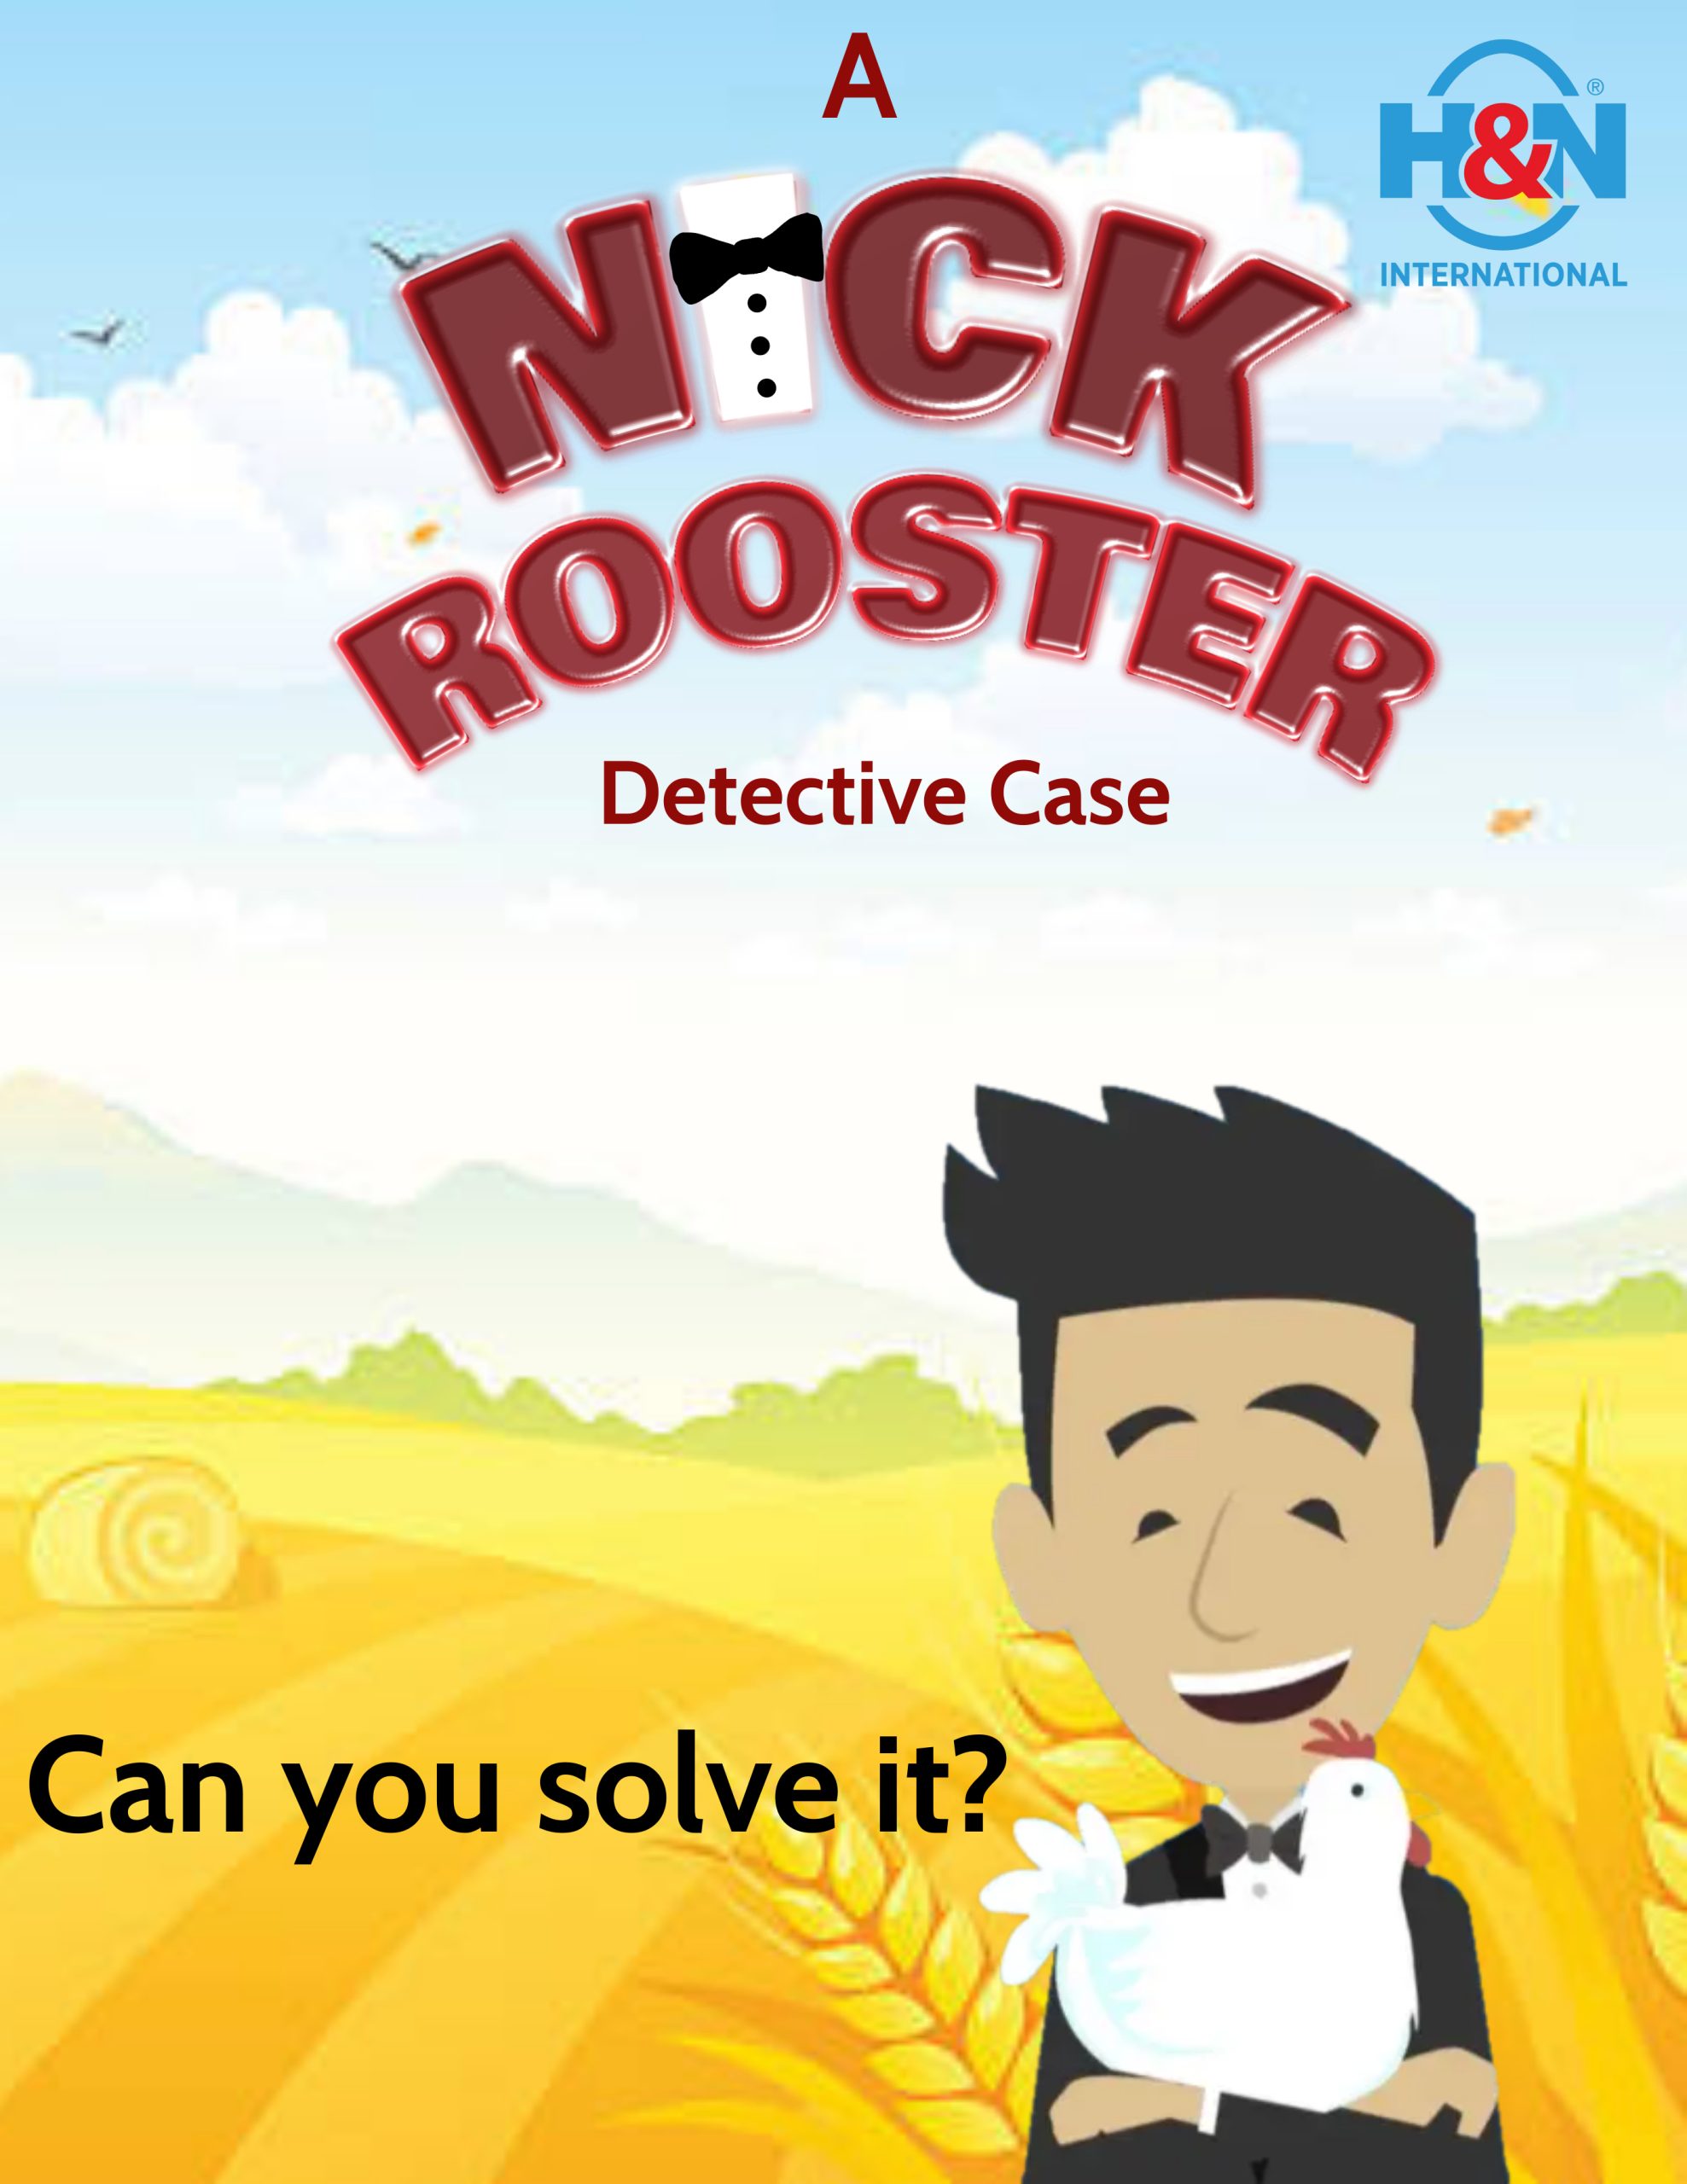 Nick Rooster case no. 17